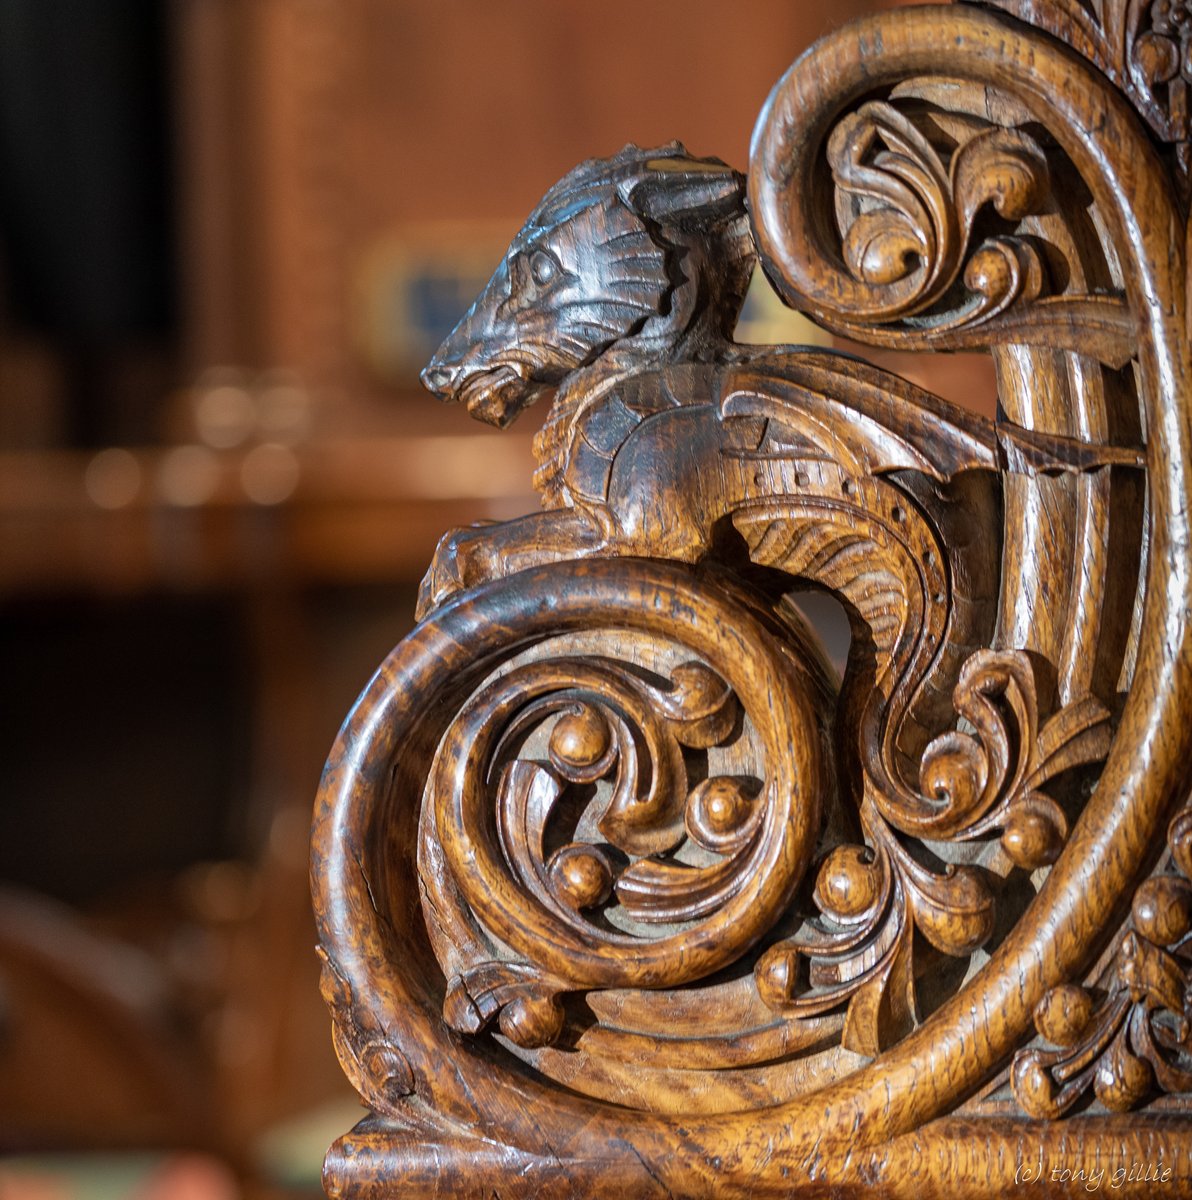 A peaceful dragon hiding in plain sight in the Quire stalls at Salisbury Cathedral, trying to keep out of the way of people with sharp weapons...
#DragonsInChurches #AnimalsInChurchesHour